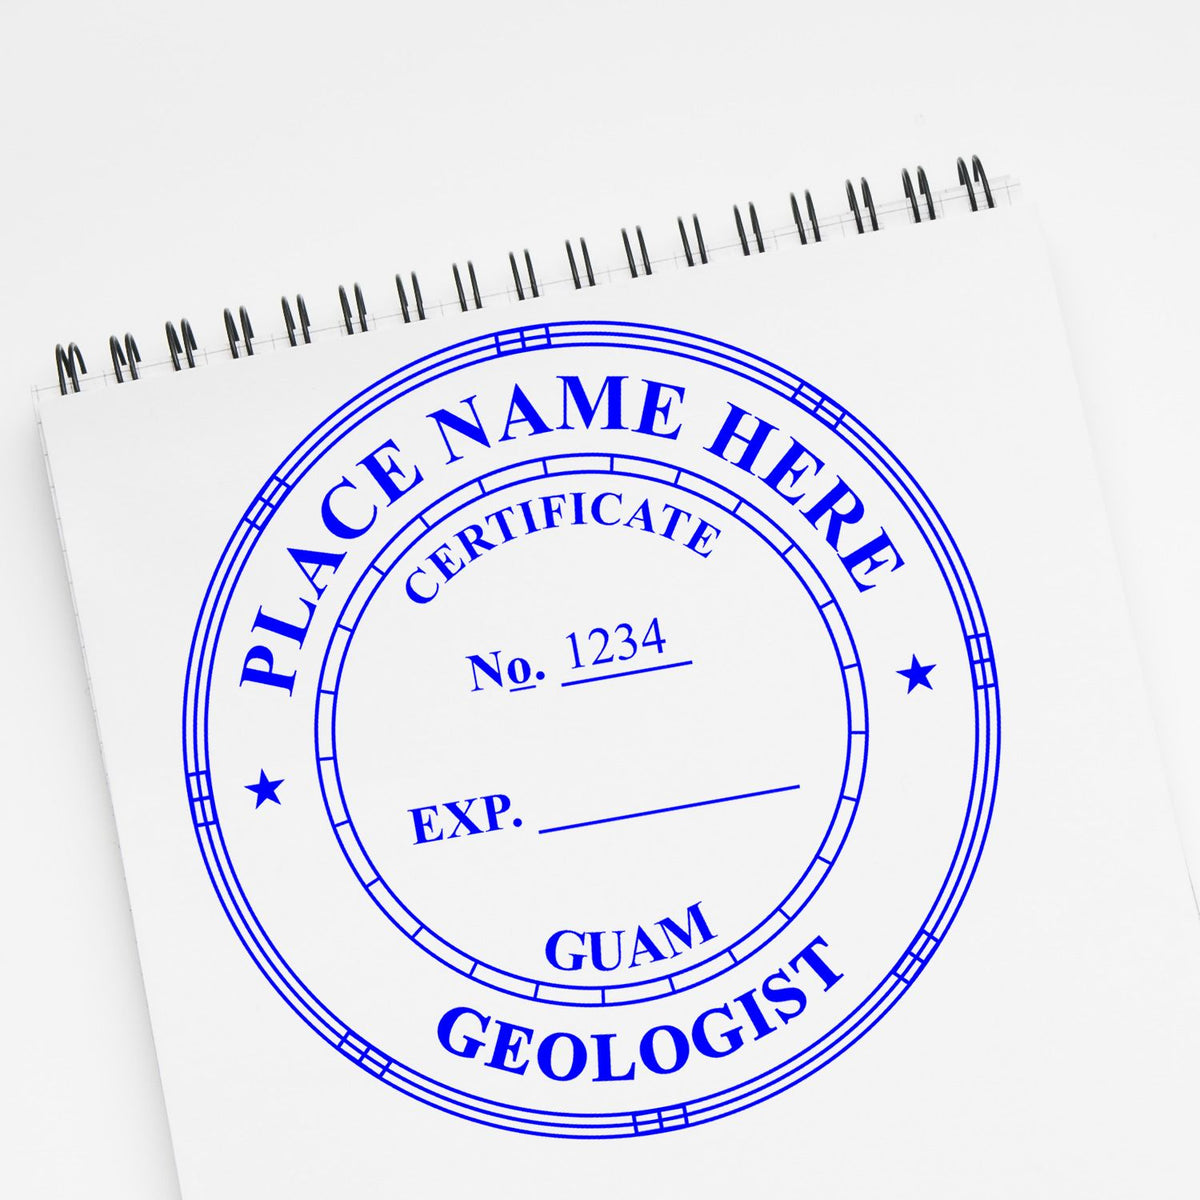 A lifestyle photo showing a stamped image of the Digital Guam Geologist Stamp, Electronic Seal for Guam Geologist on a piece of paper